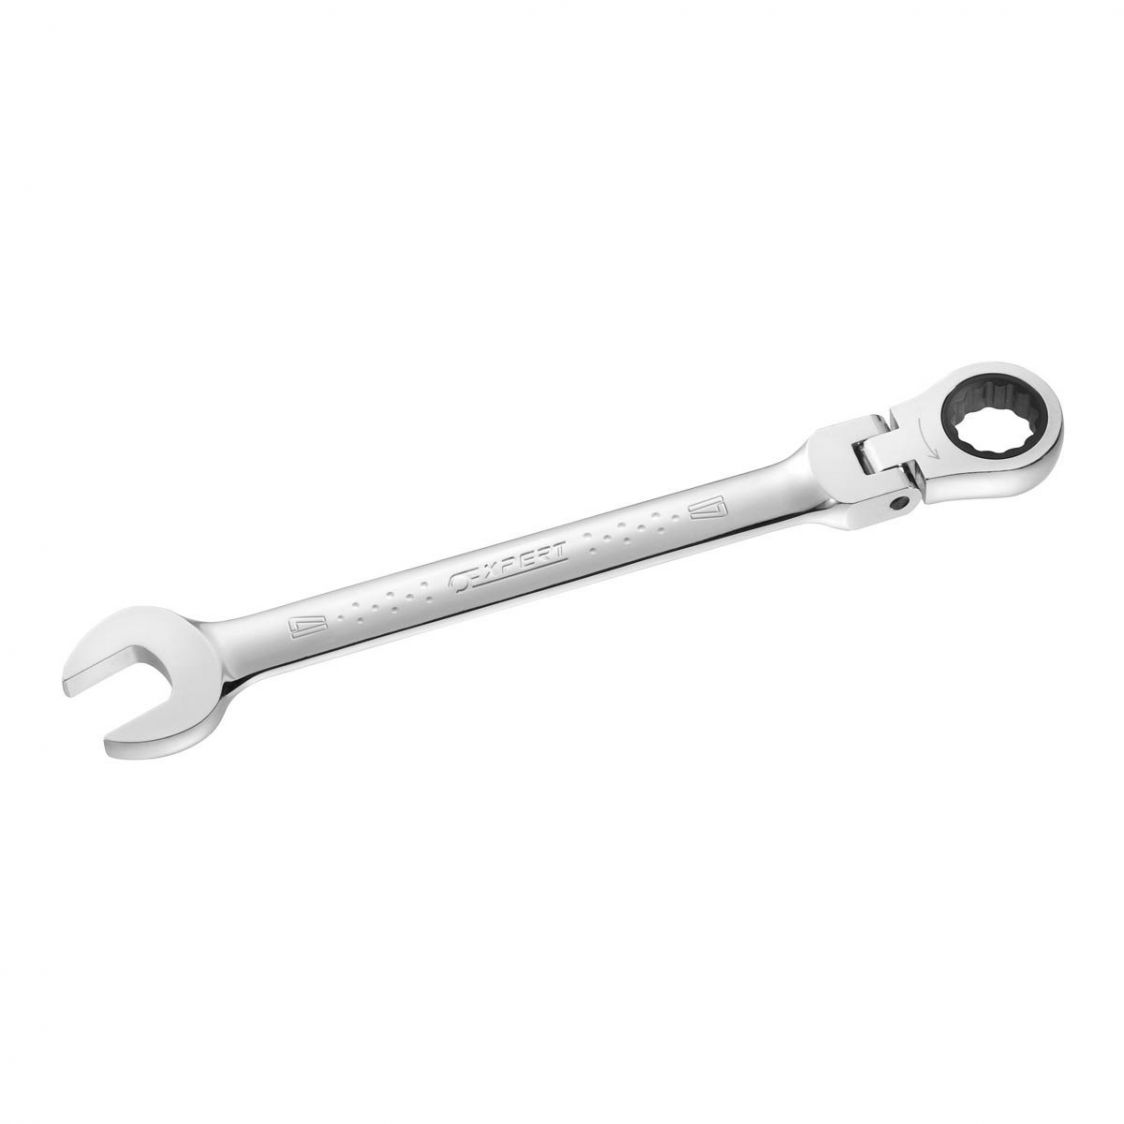 EXPERT by FACOM E110912 - 19mm Metric Hinged Ratchet Combination Spanner